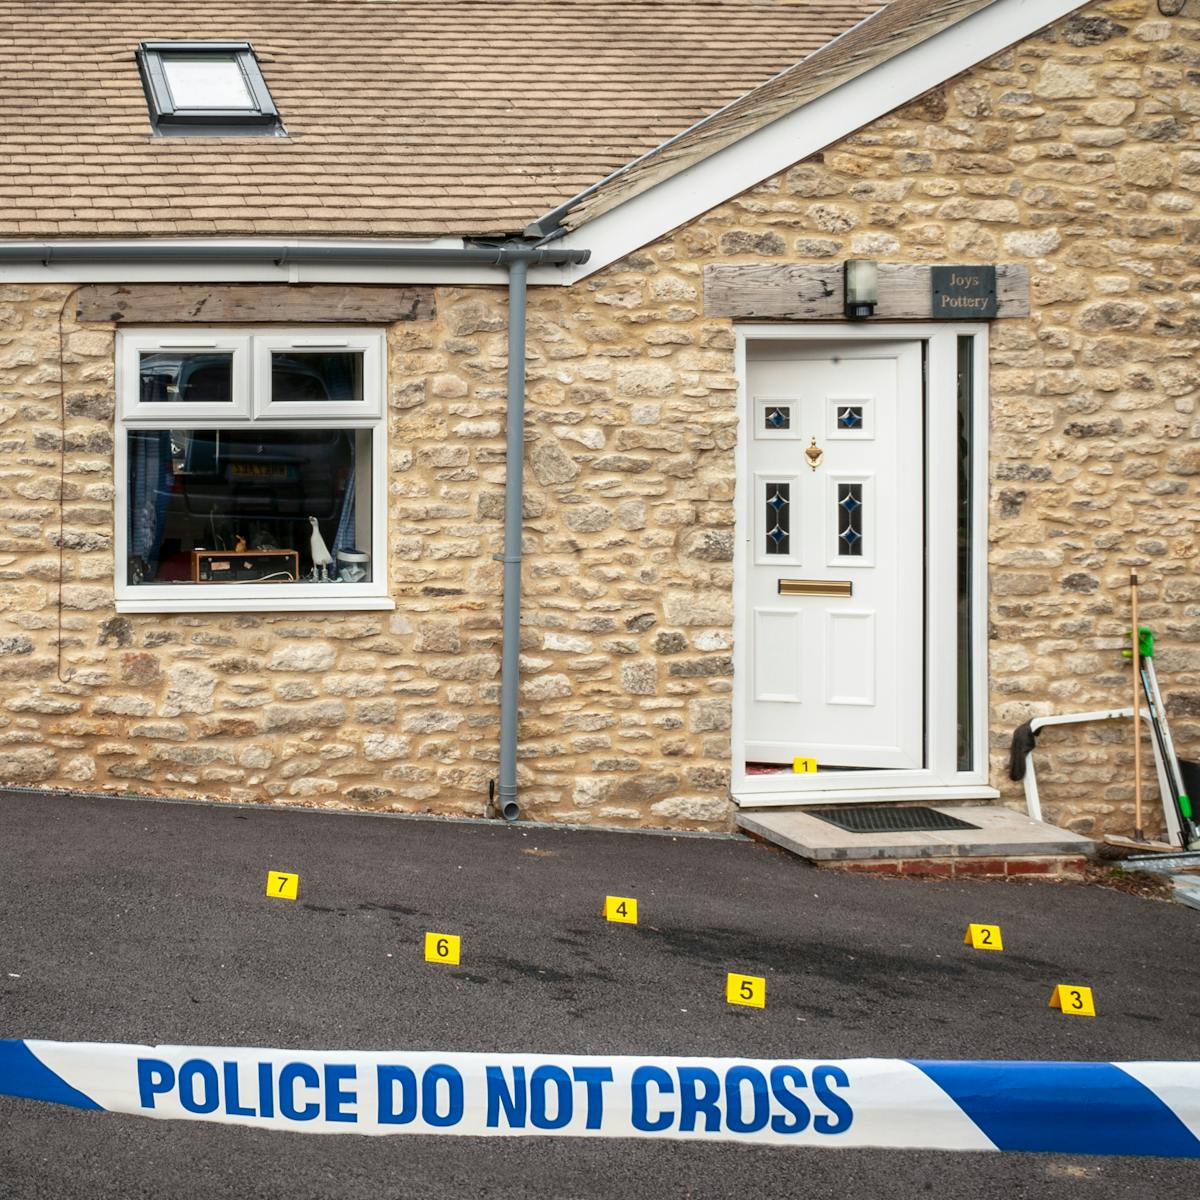 Photograph of the front of a house with the front door slightly open and forensic crime scene numbered yellow markers on the ground. In the foreground is a police cordon with 'Police Do Not Cross' written across the tape.